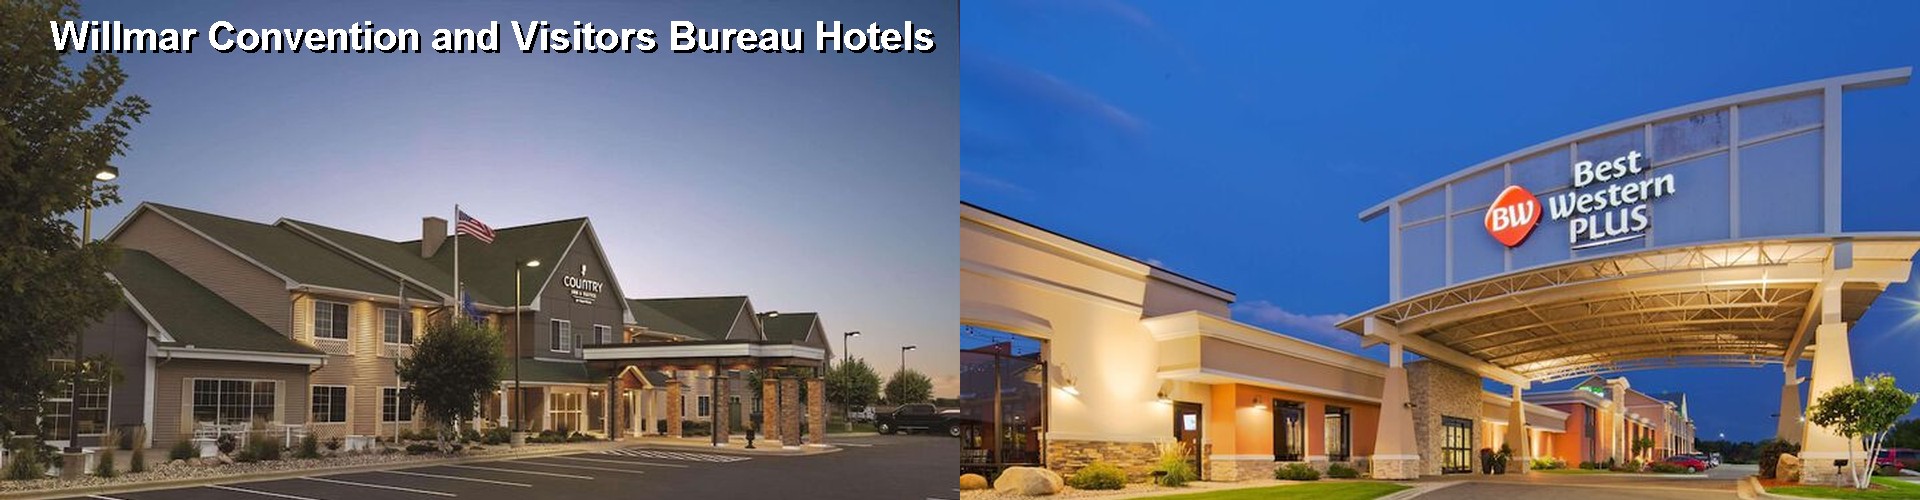 5 Best Hotels near Willmar Convention and Visitors Bureau